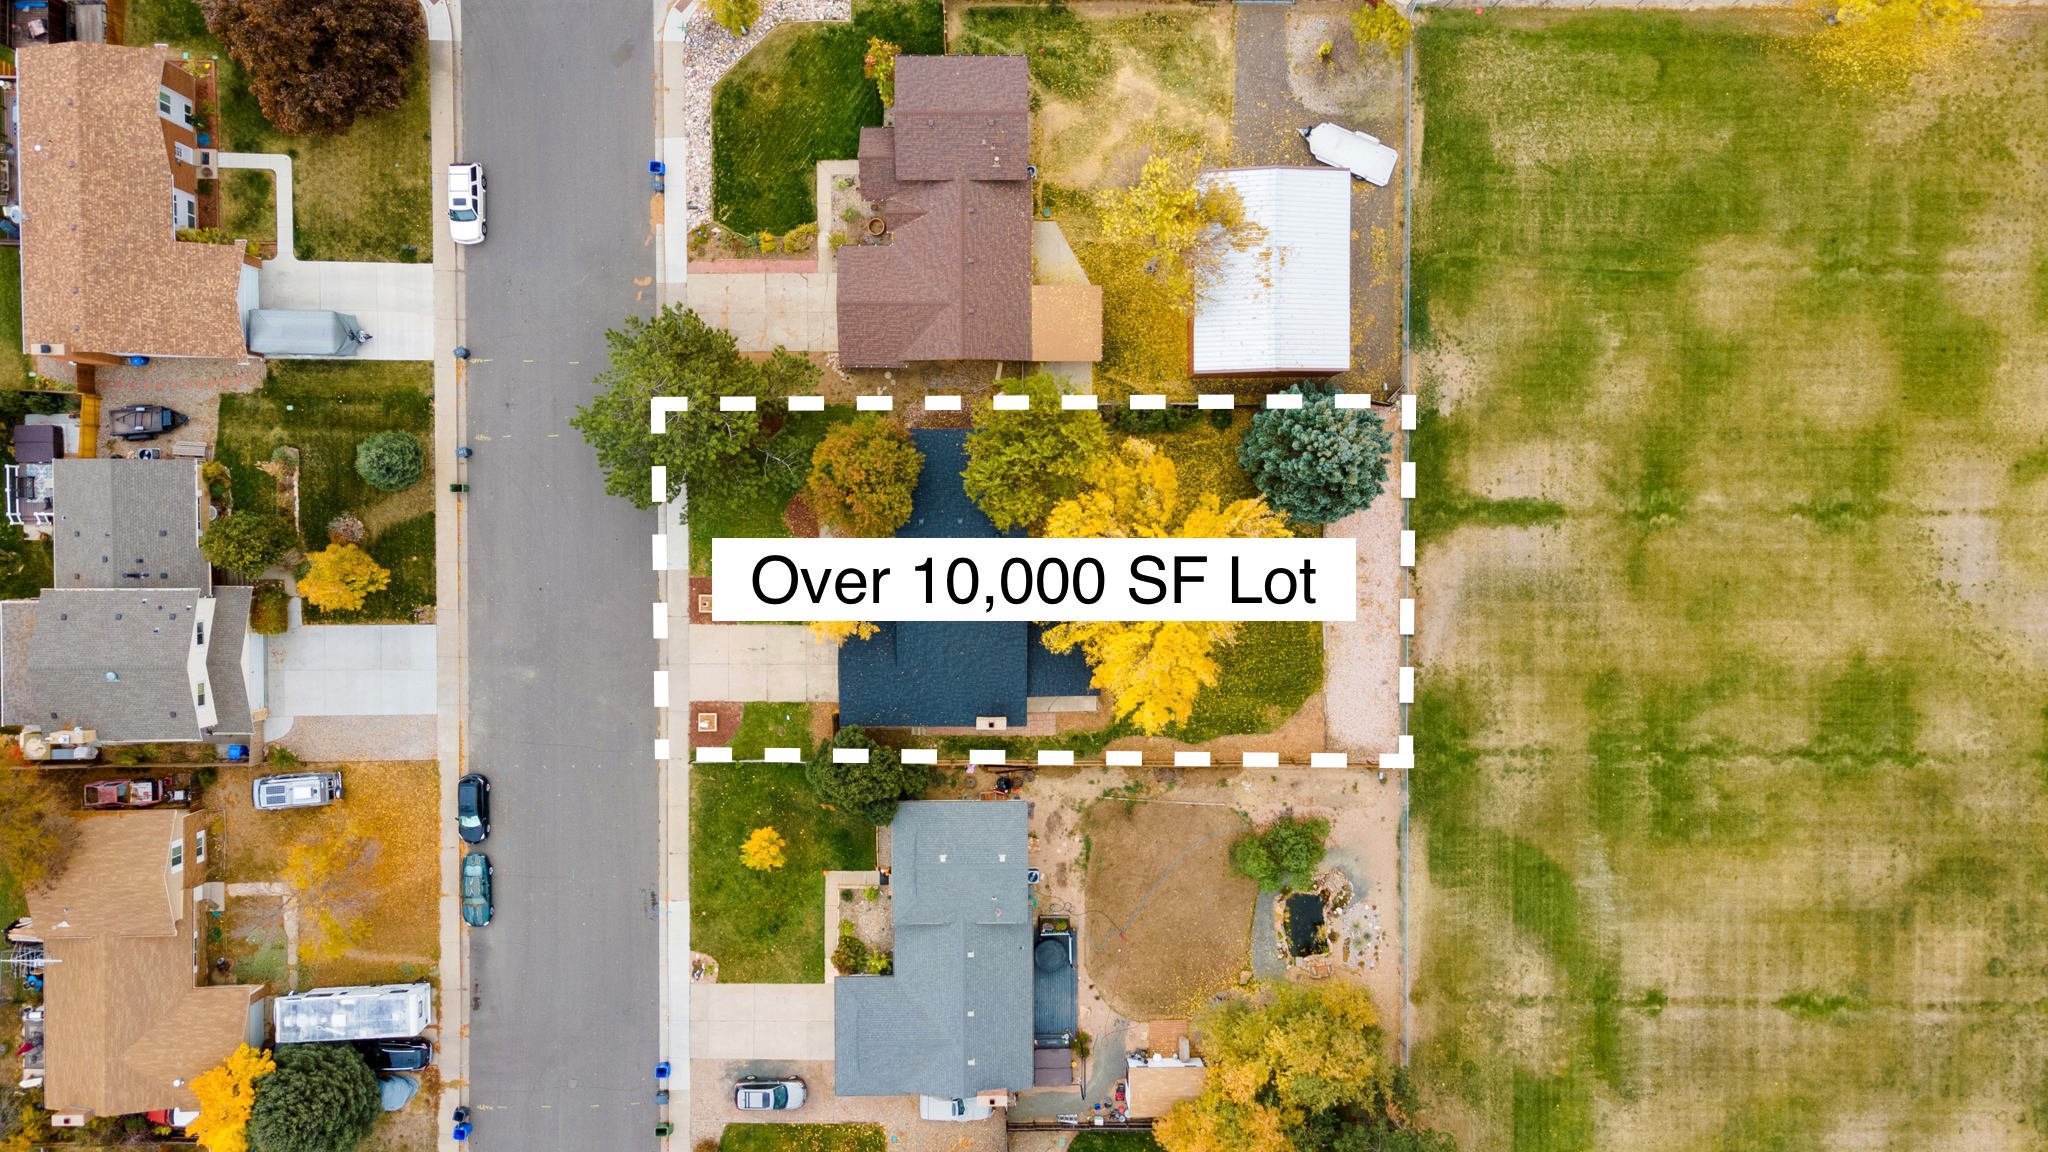 Over 10,000 SF Lot